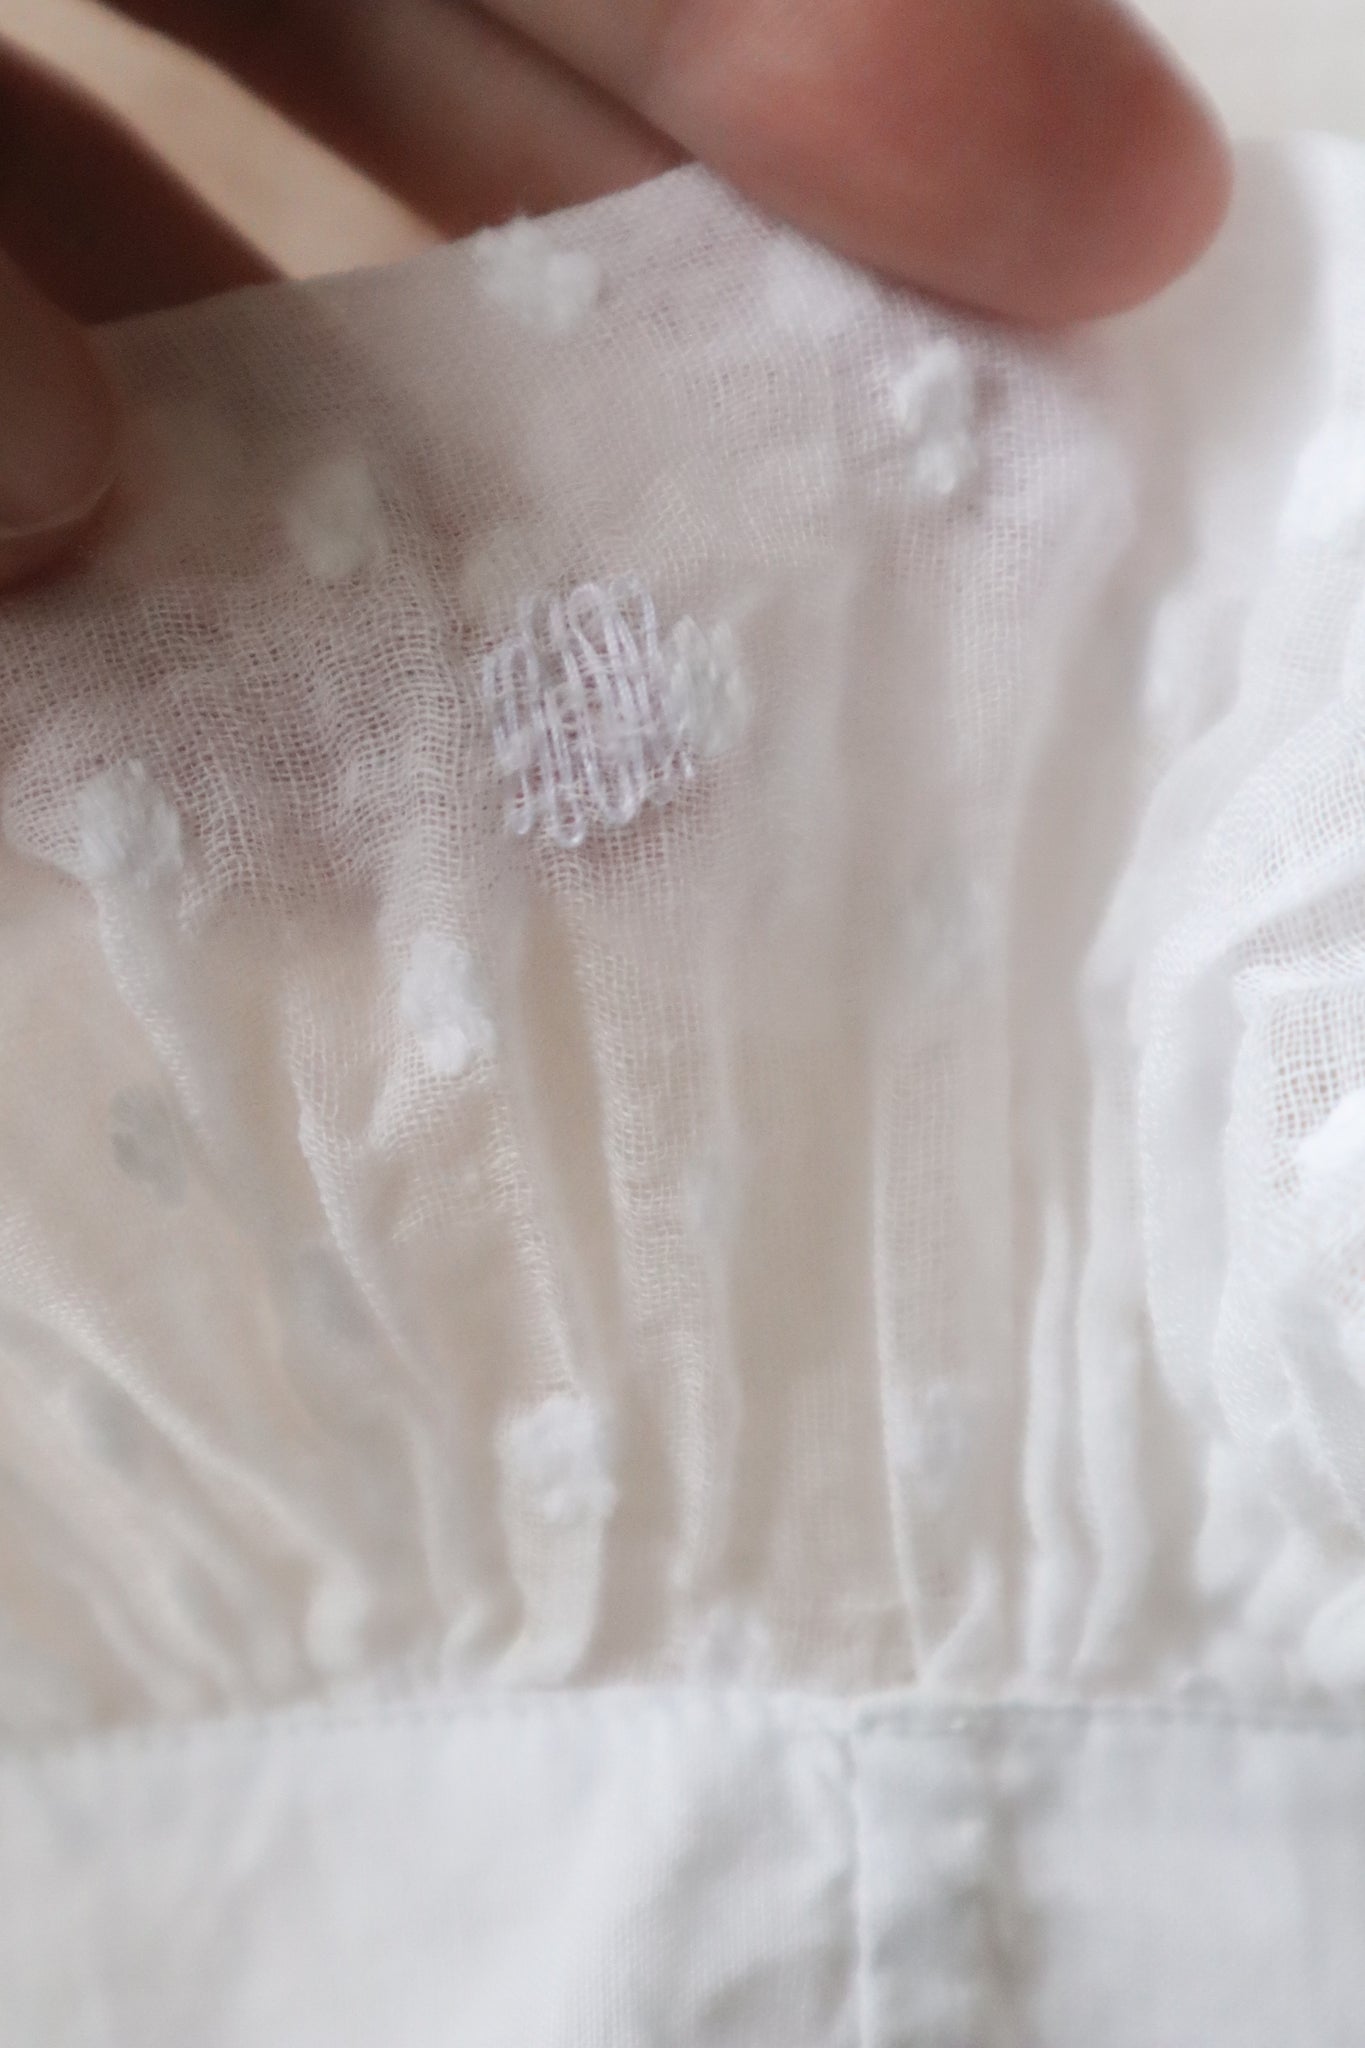 1900s Embroidered Cotton Gauze Blouse